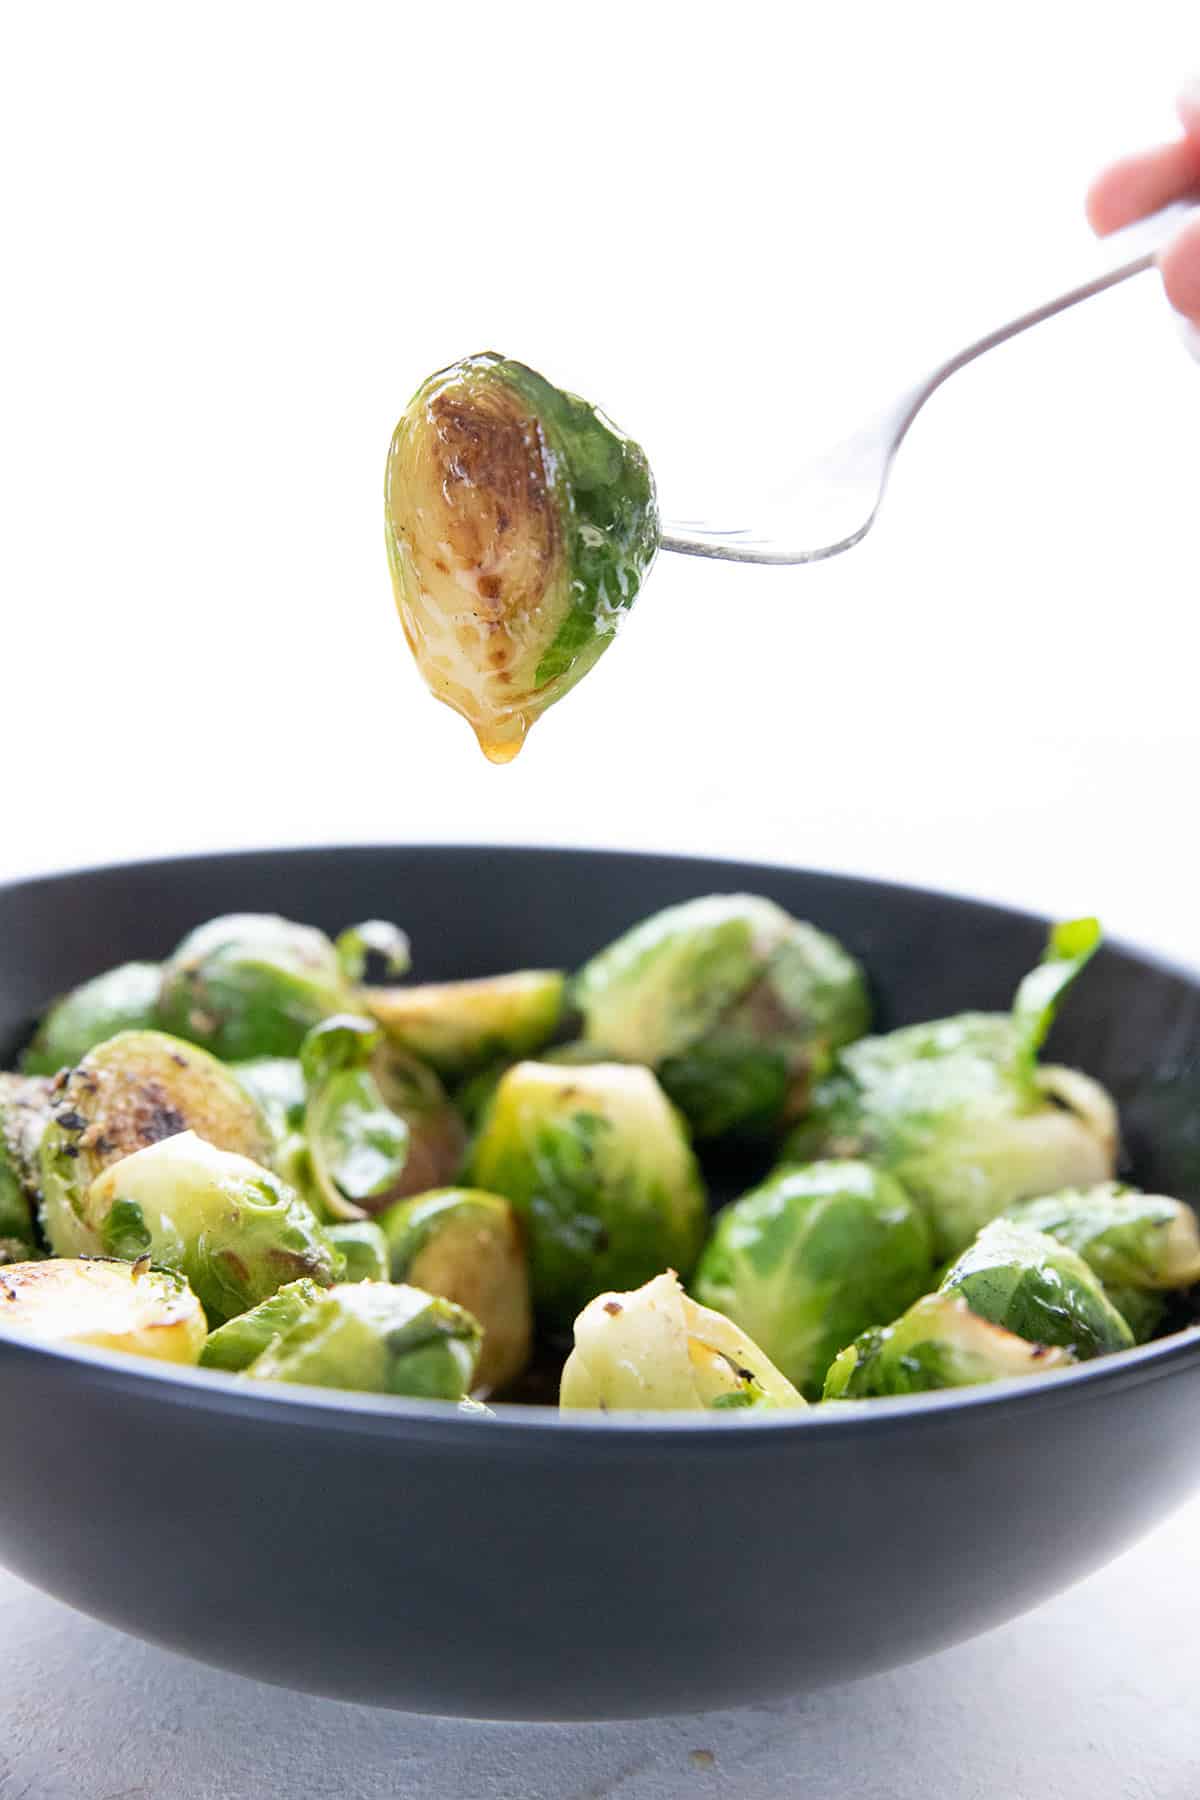 A fork holds up a caramelized brussels sprout dripping with brown butter.